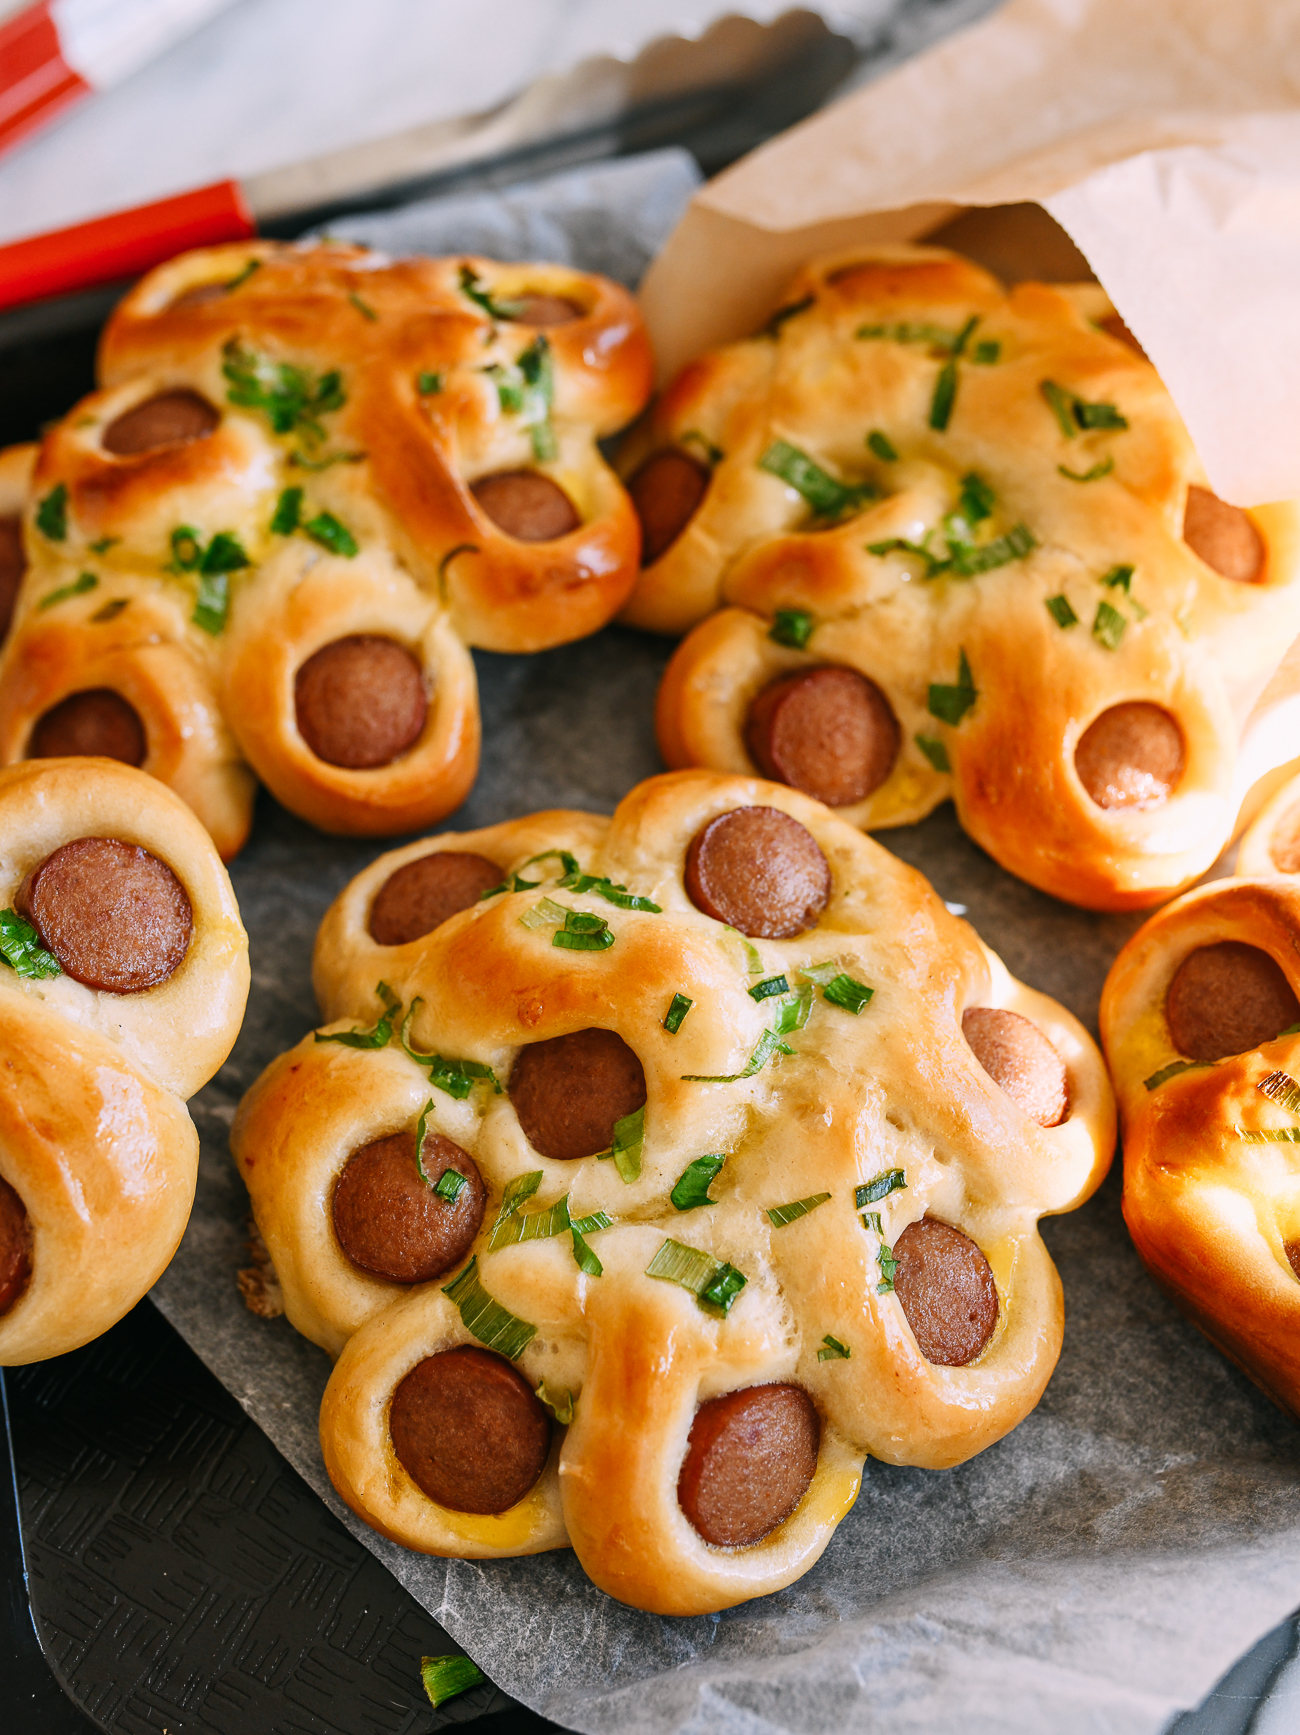 Flower hot dog buns in Chinese bakery style